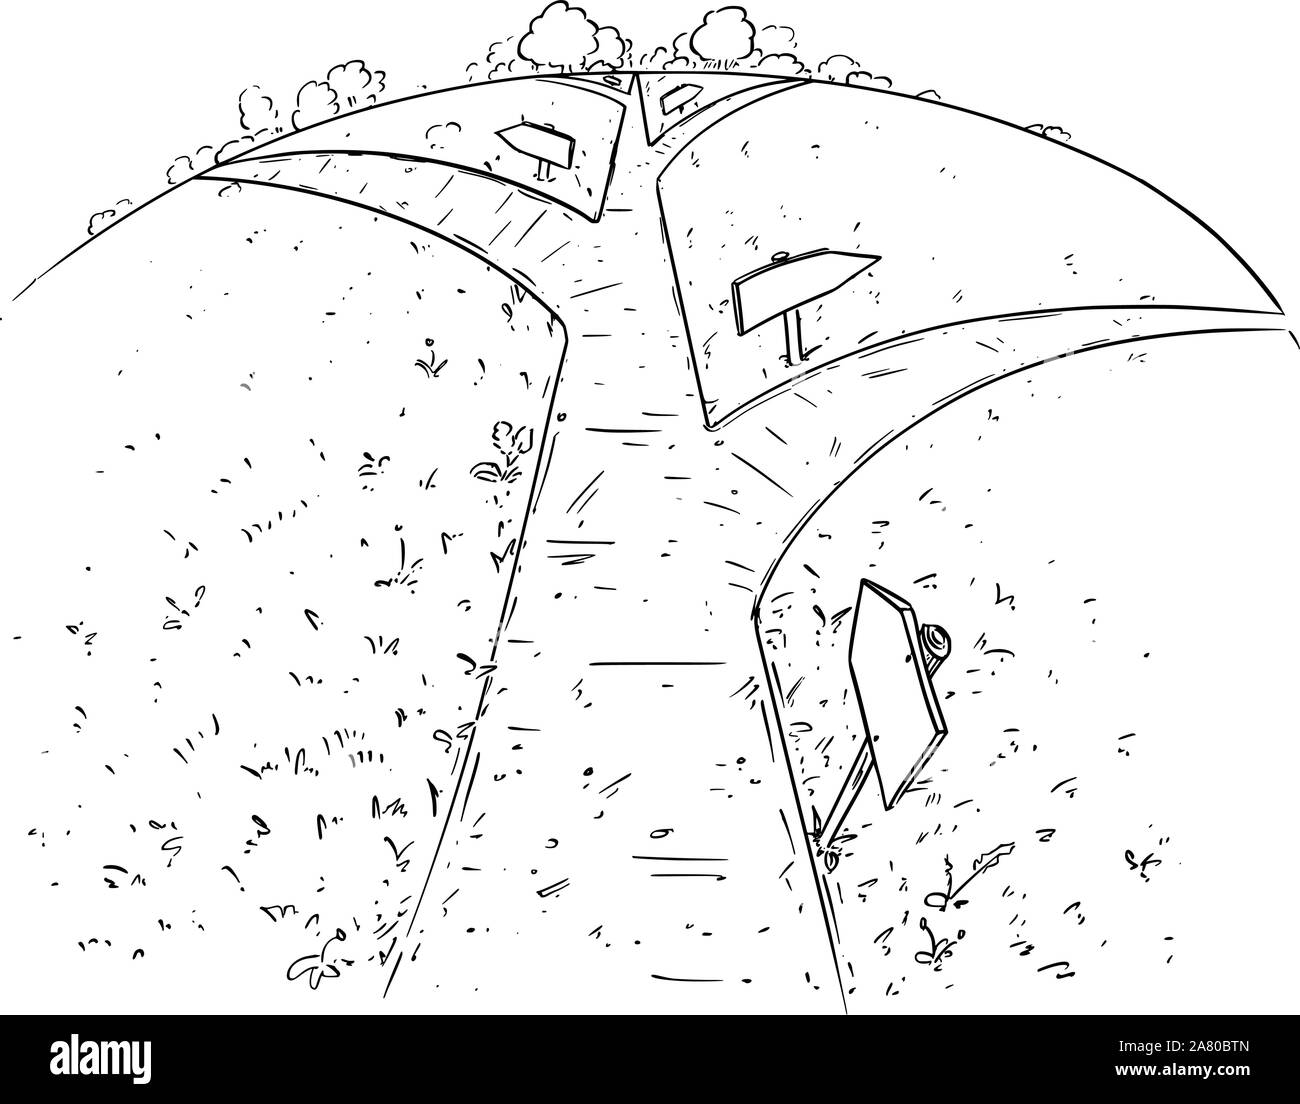 Vector cartoon pen and ink drawing of road or path forward and branching through grass, meadows and nature. Concept of future and destiny. Stock Vector